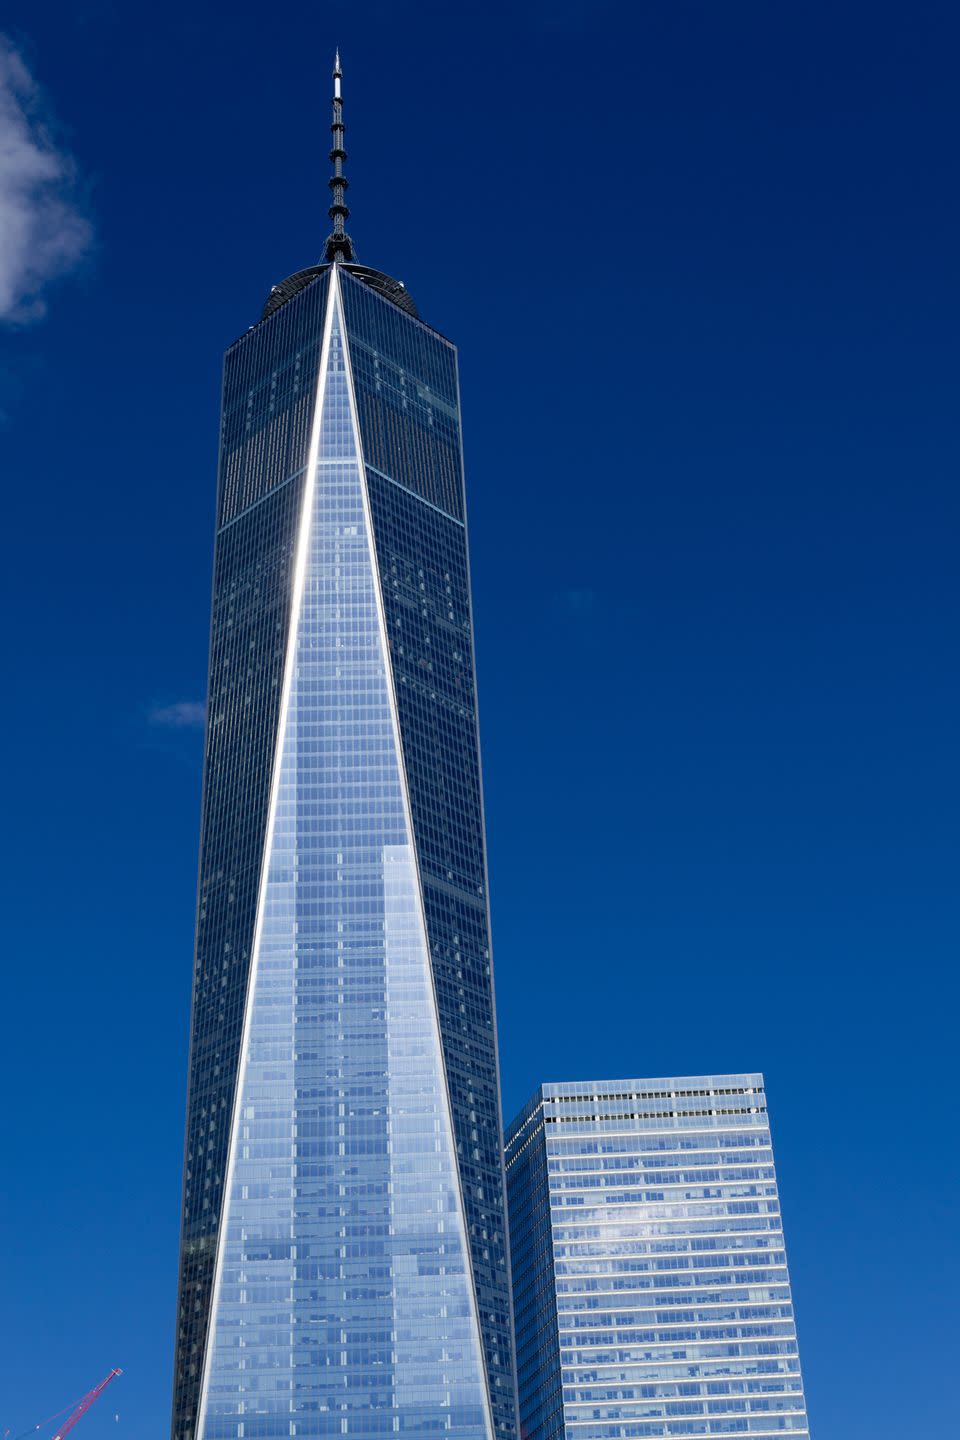 Check out the One World Trade Center Observatory.